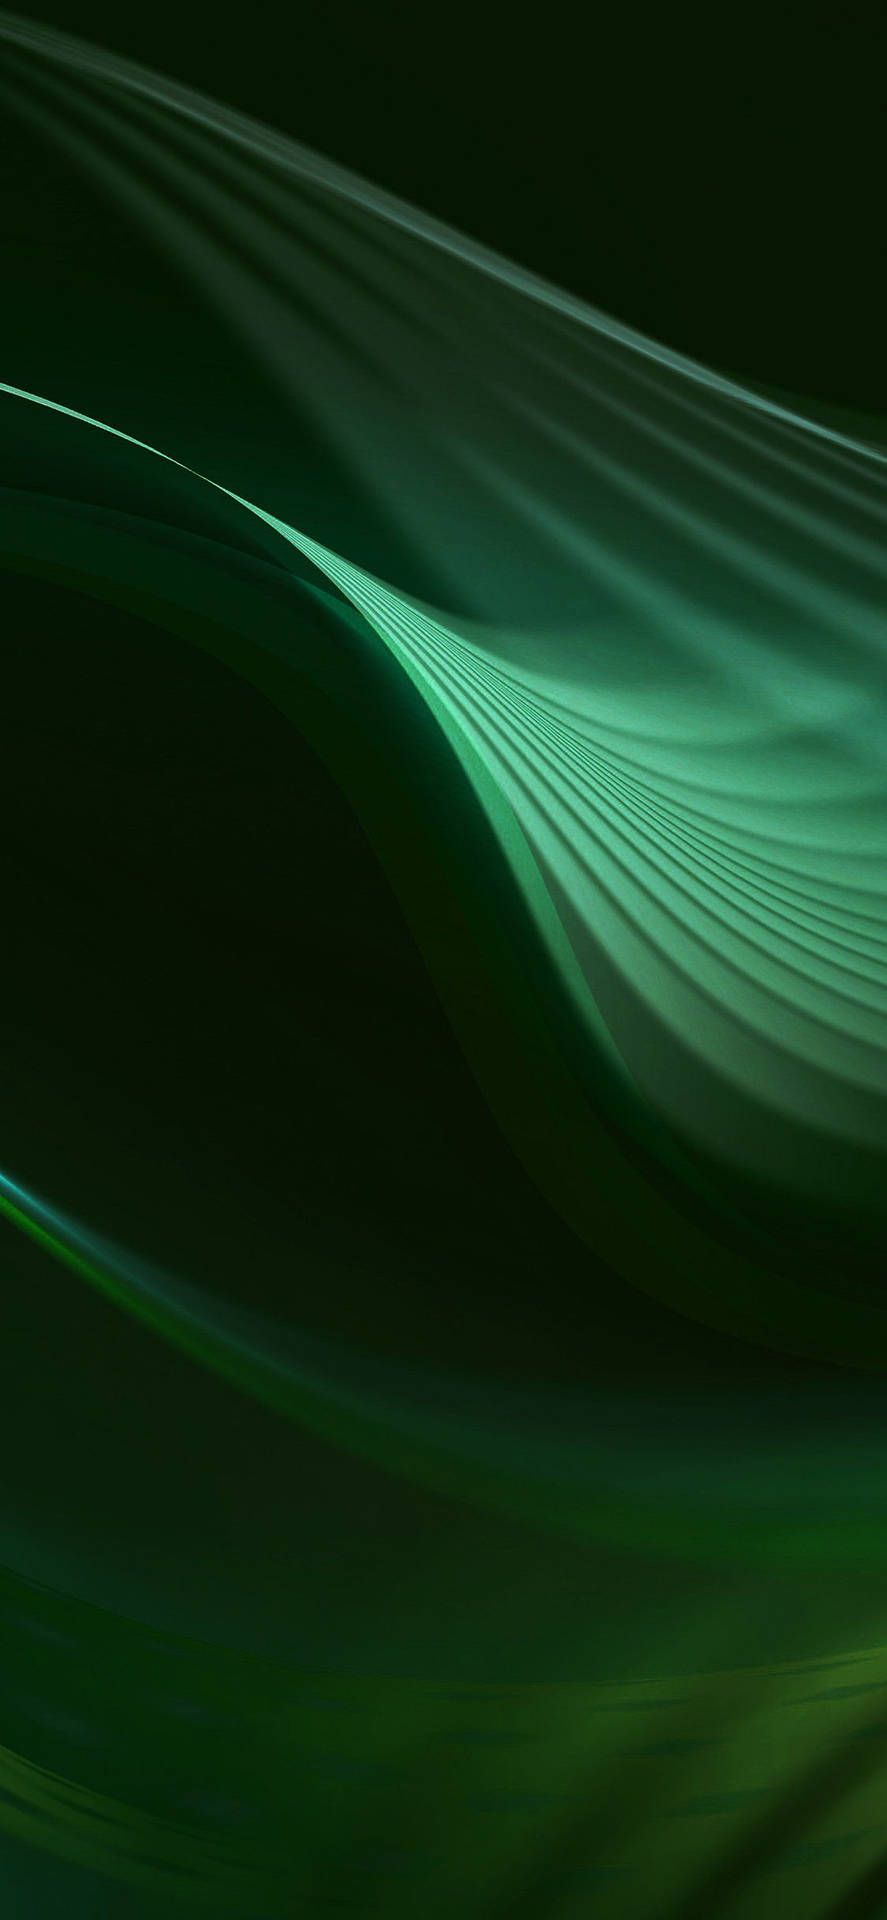 A Green Abstract Background With Waves Wallpaper